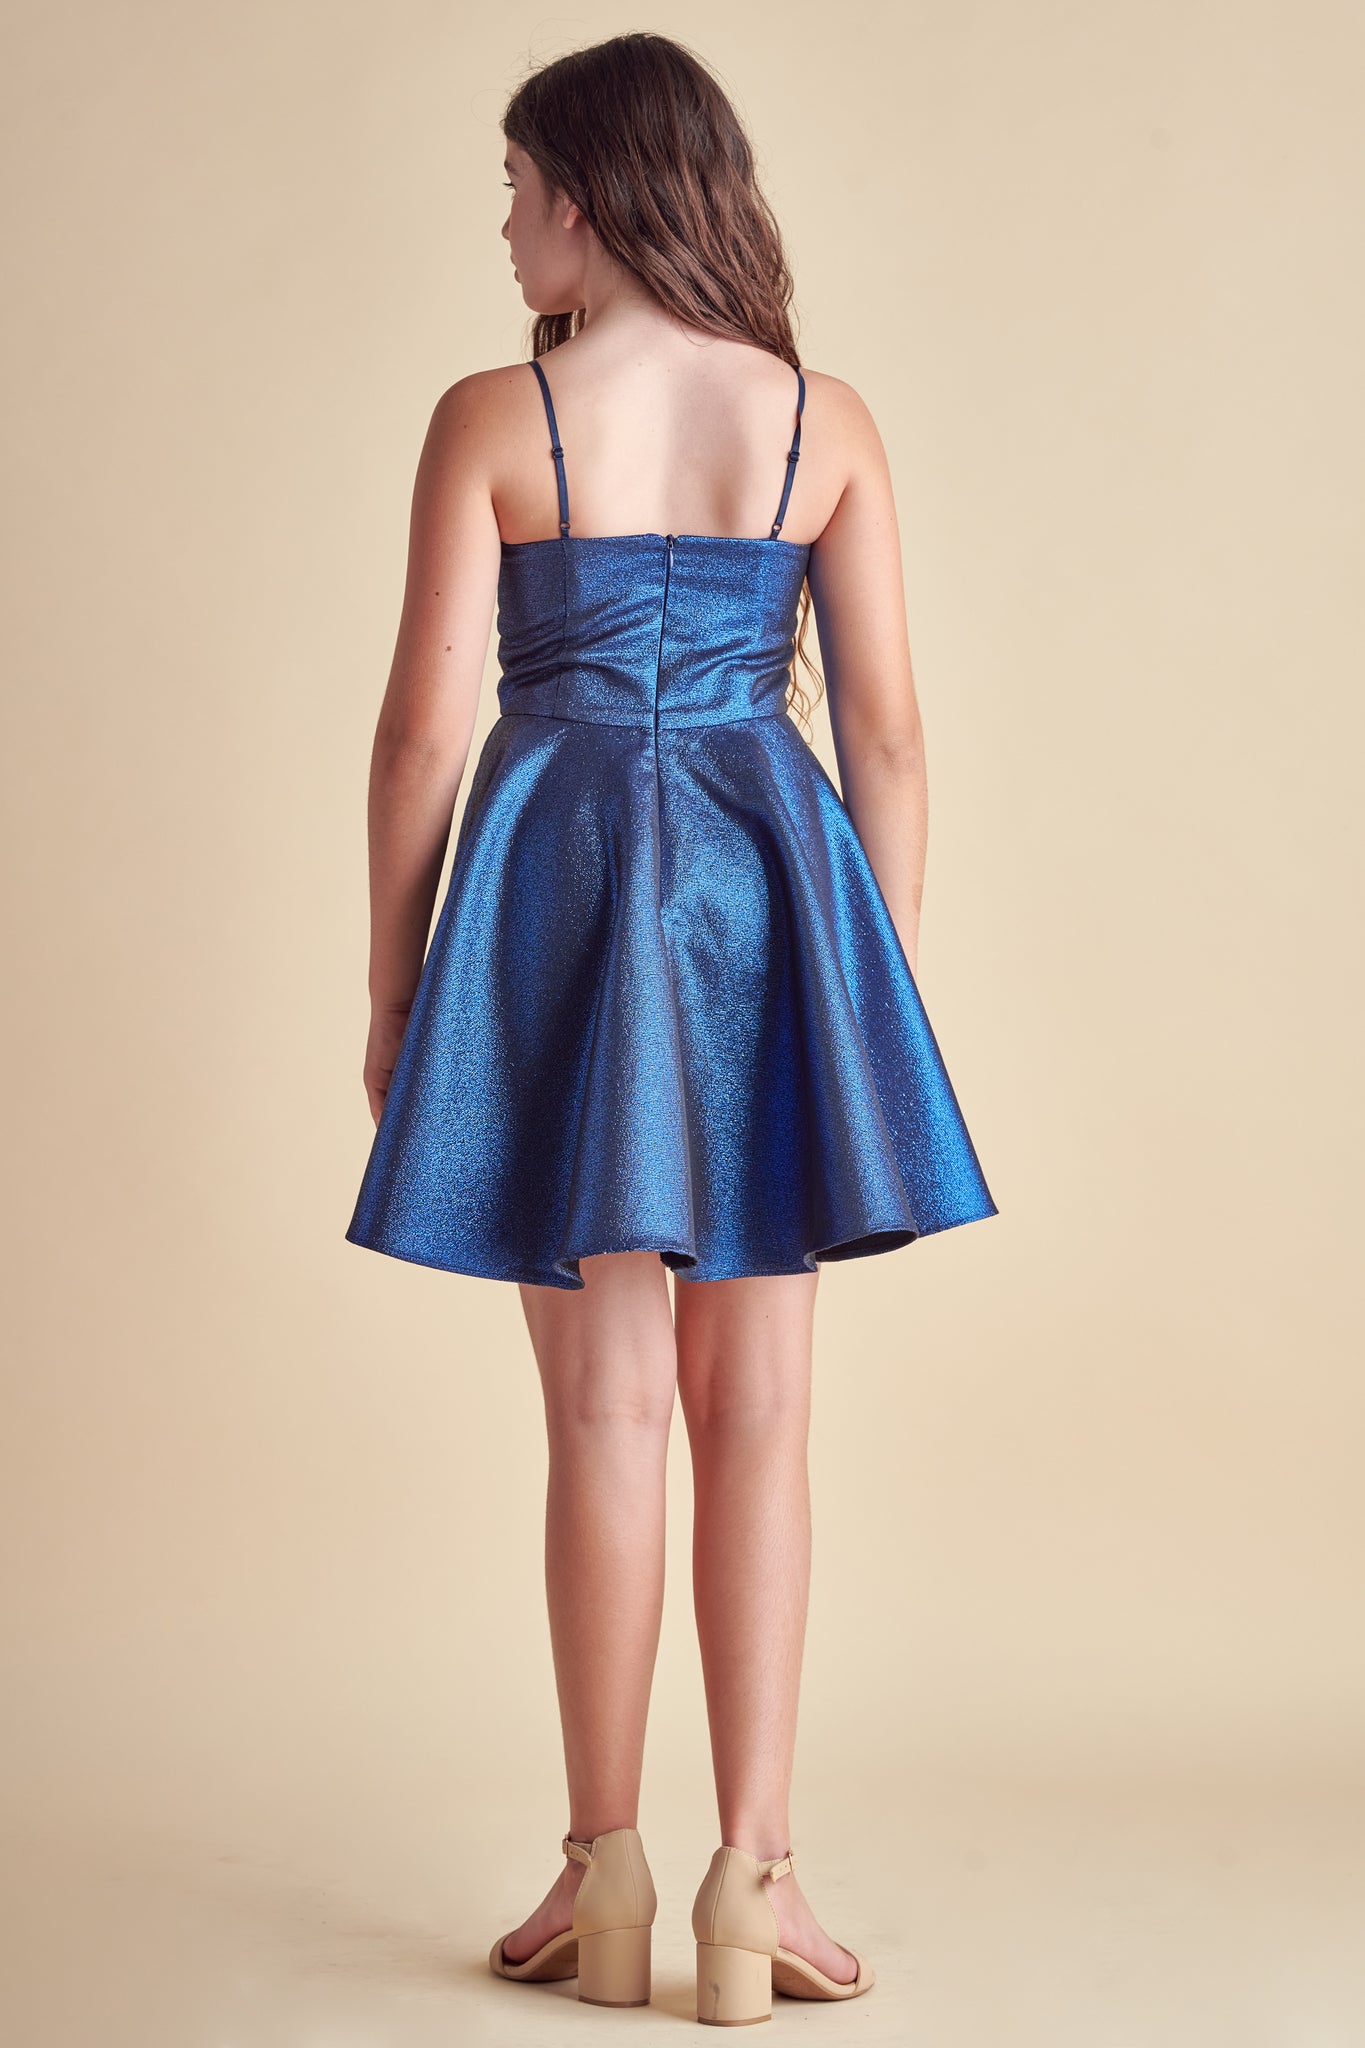 This is an all over non-stretch, glitter fabric dress made in a longer length in cobalt blue. It hits right above the knee and features a full circle skirt.